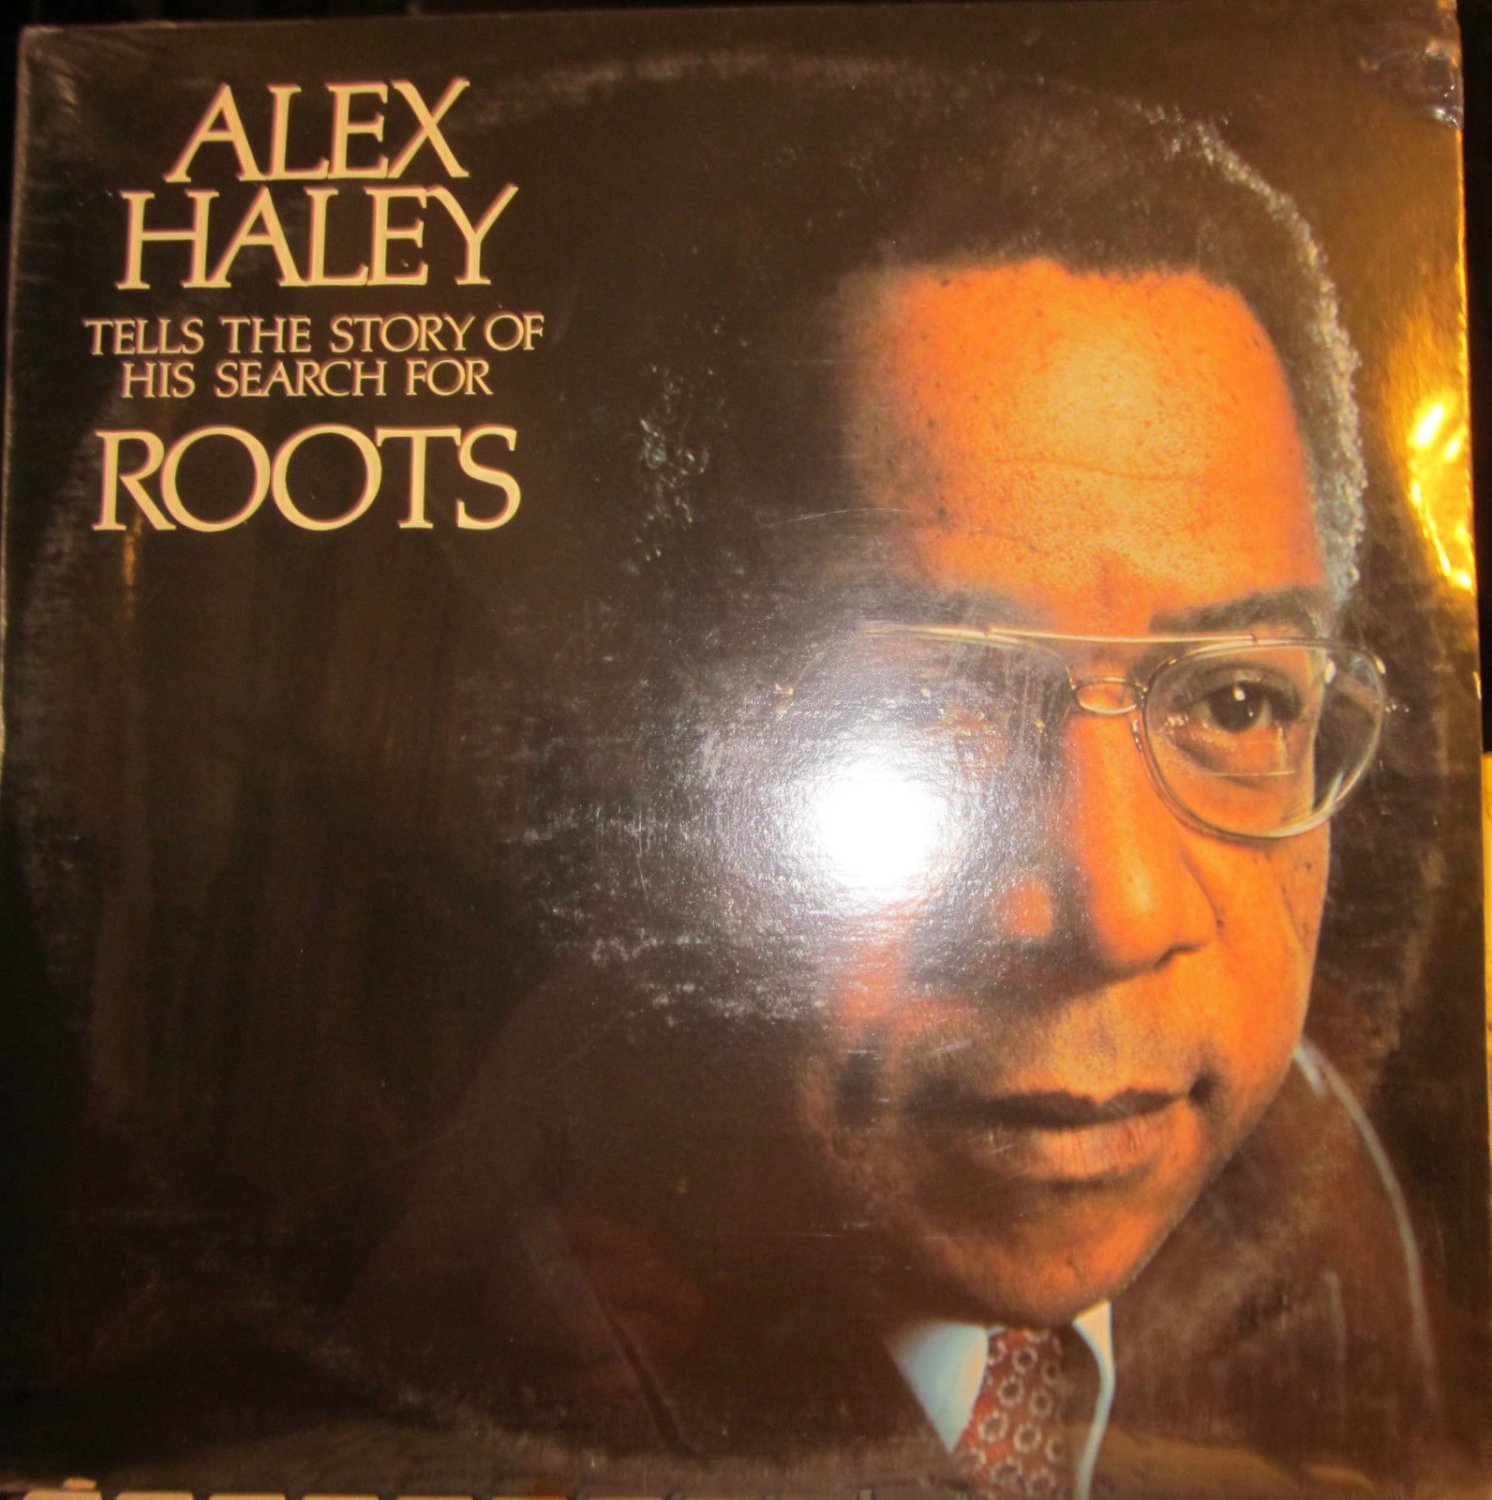 Alex Haley - Tells the Story of His Search for ROOTS (W.B. 3036) 2 LPs ...